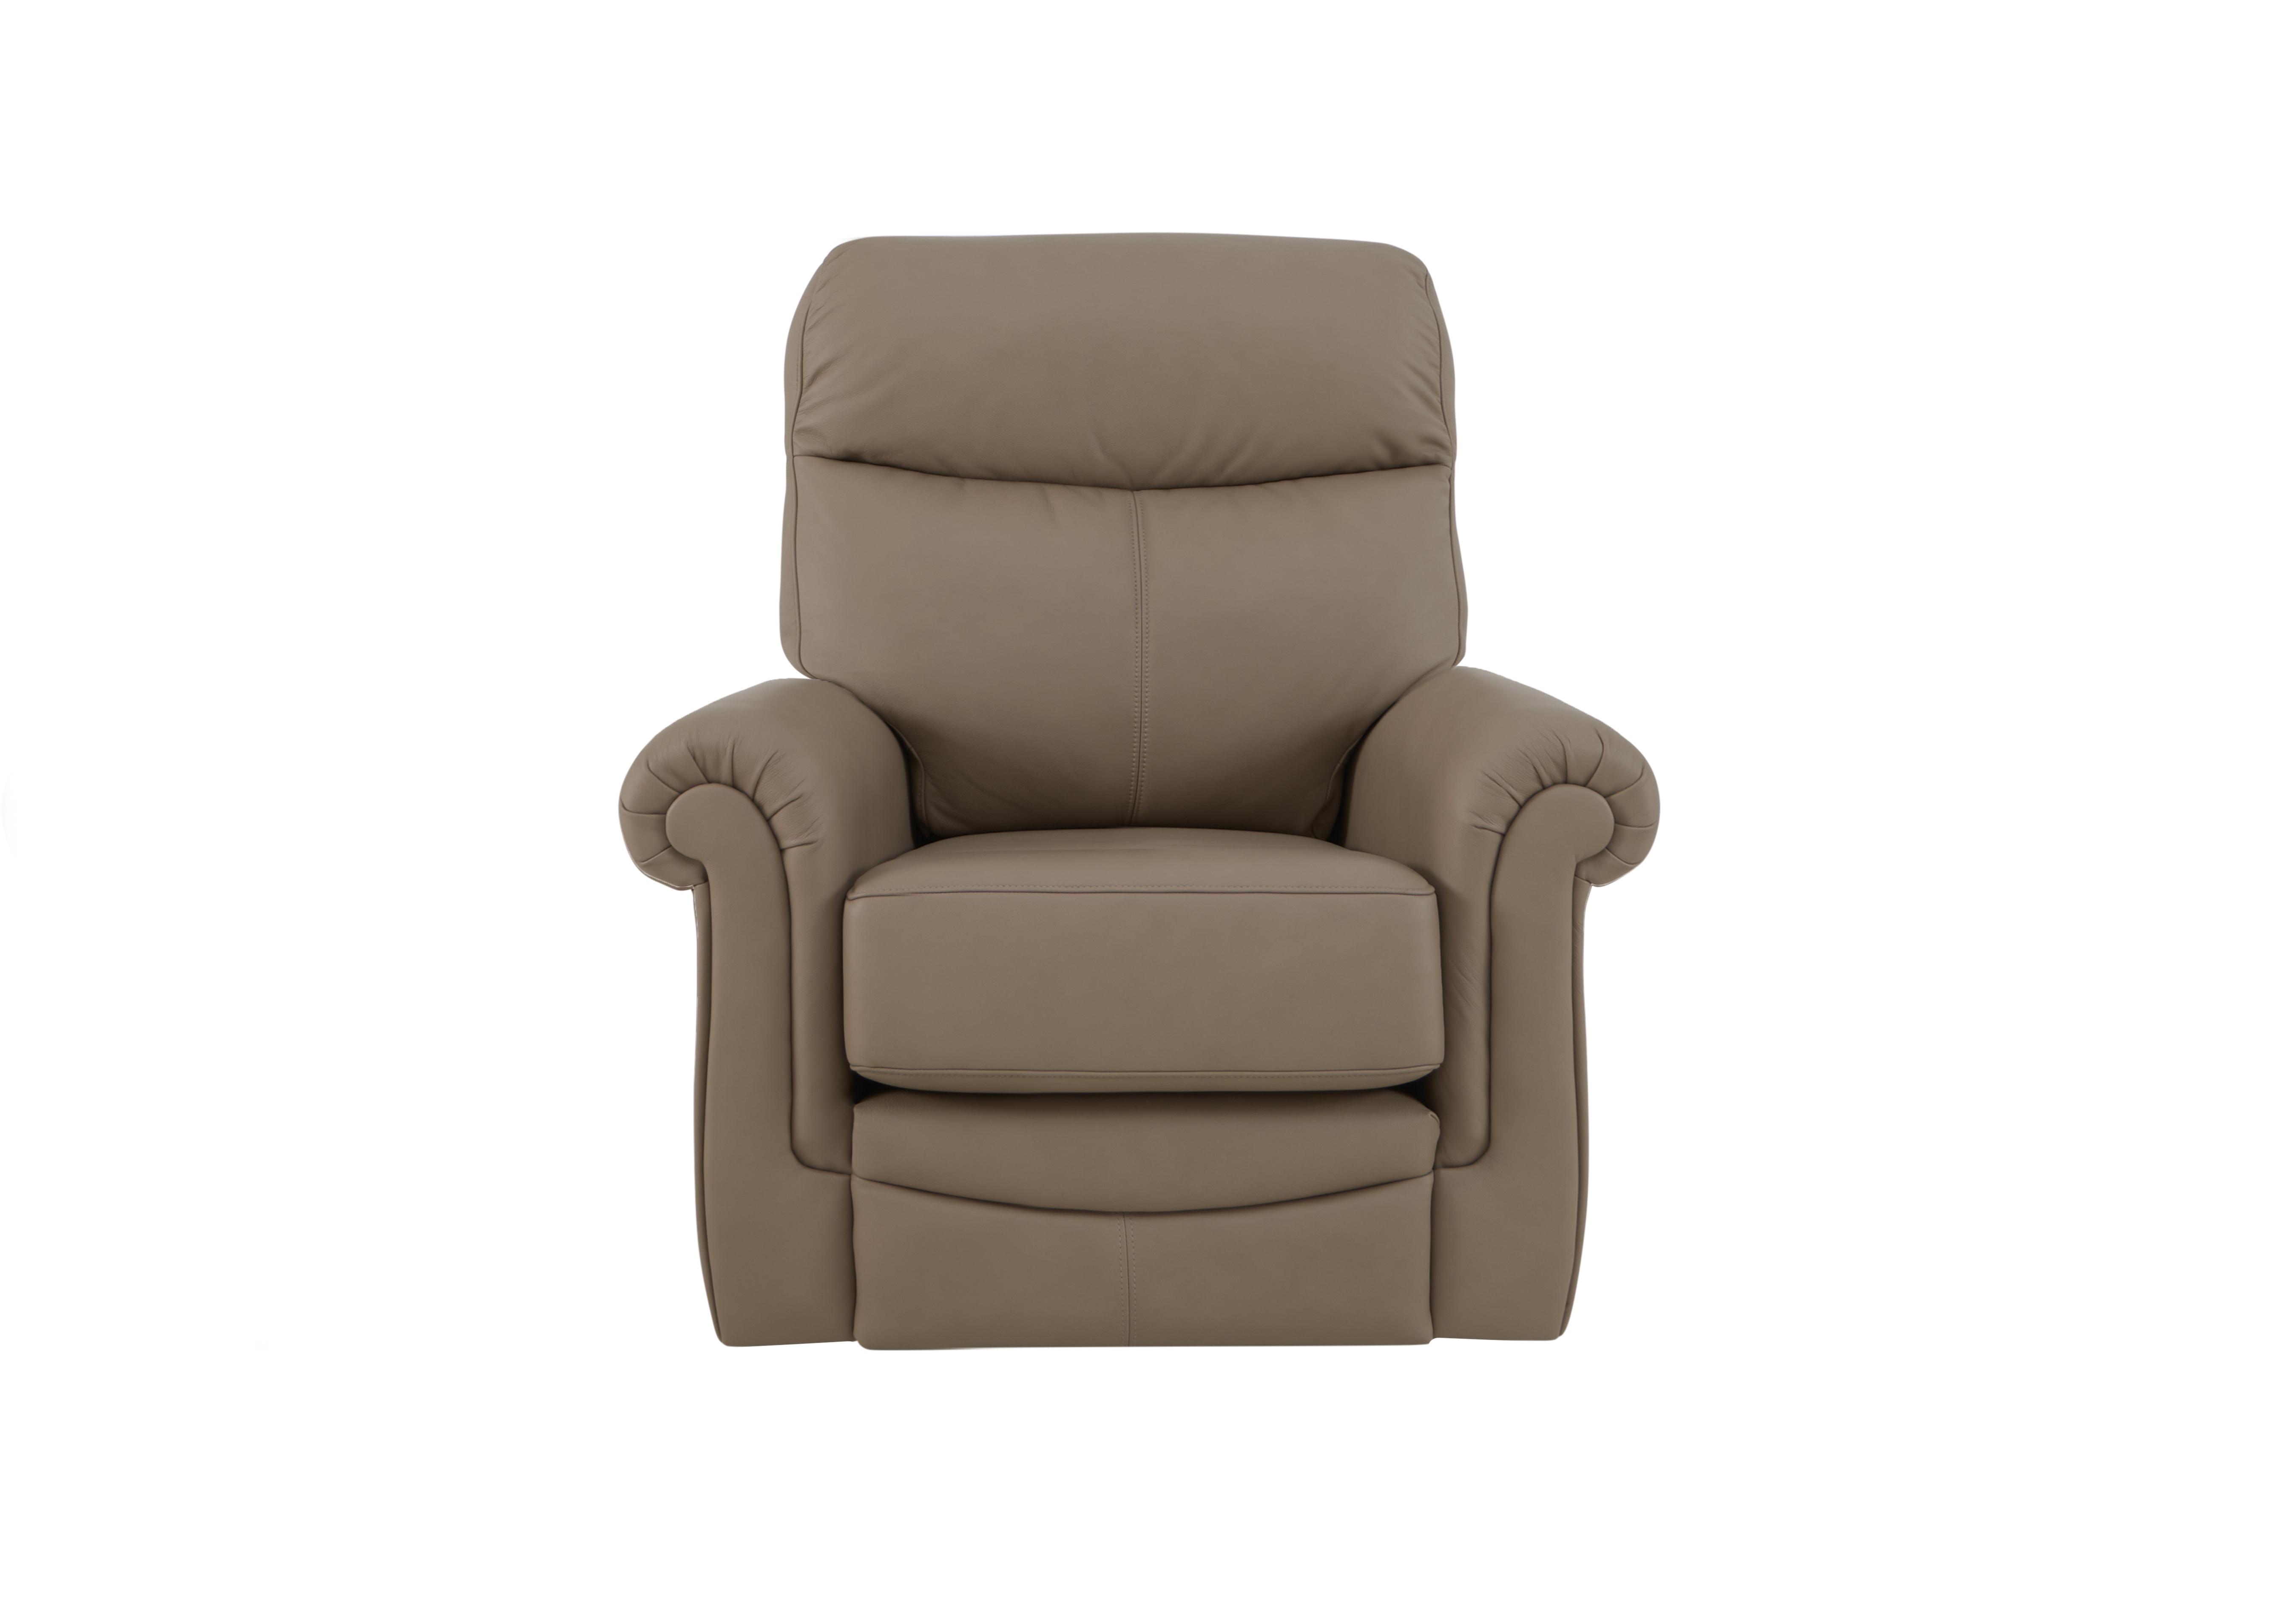 Avon Leather Recliner Armchair in L846 Cambridge Taupe on Furniture Village